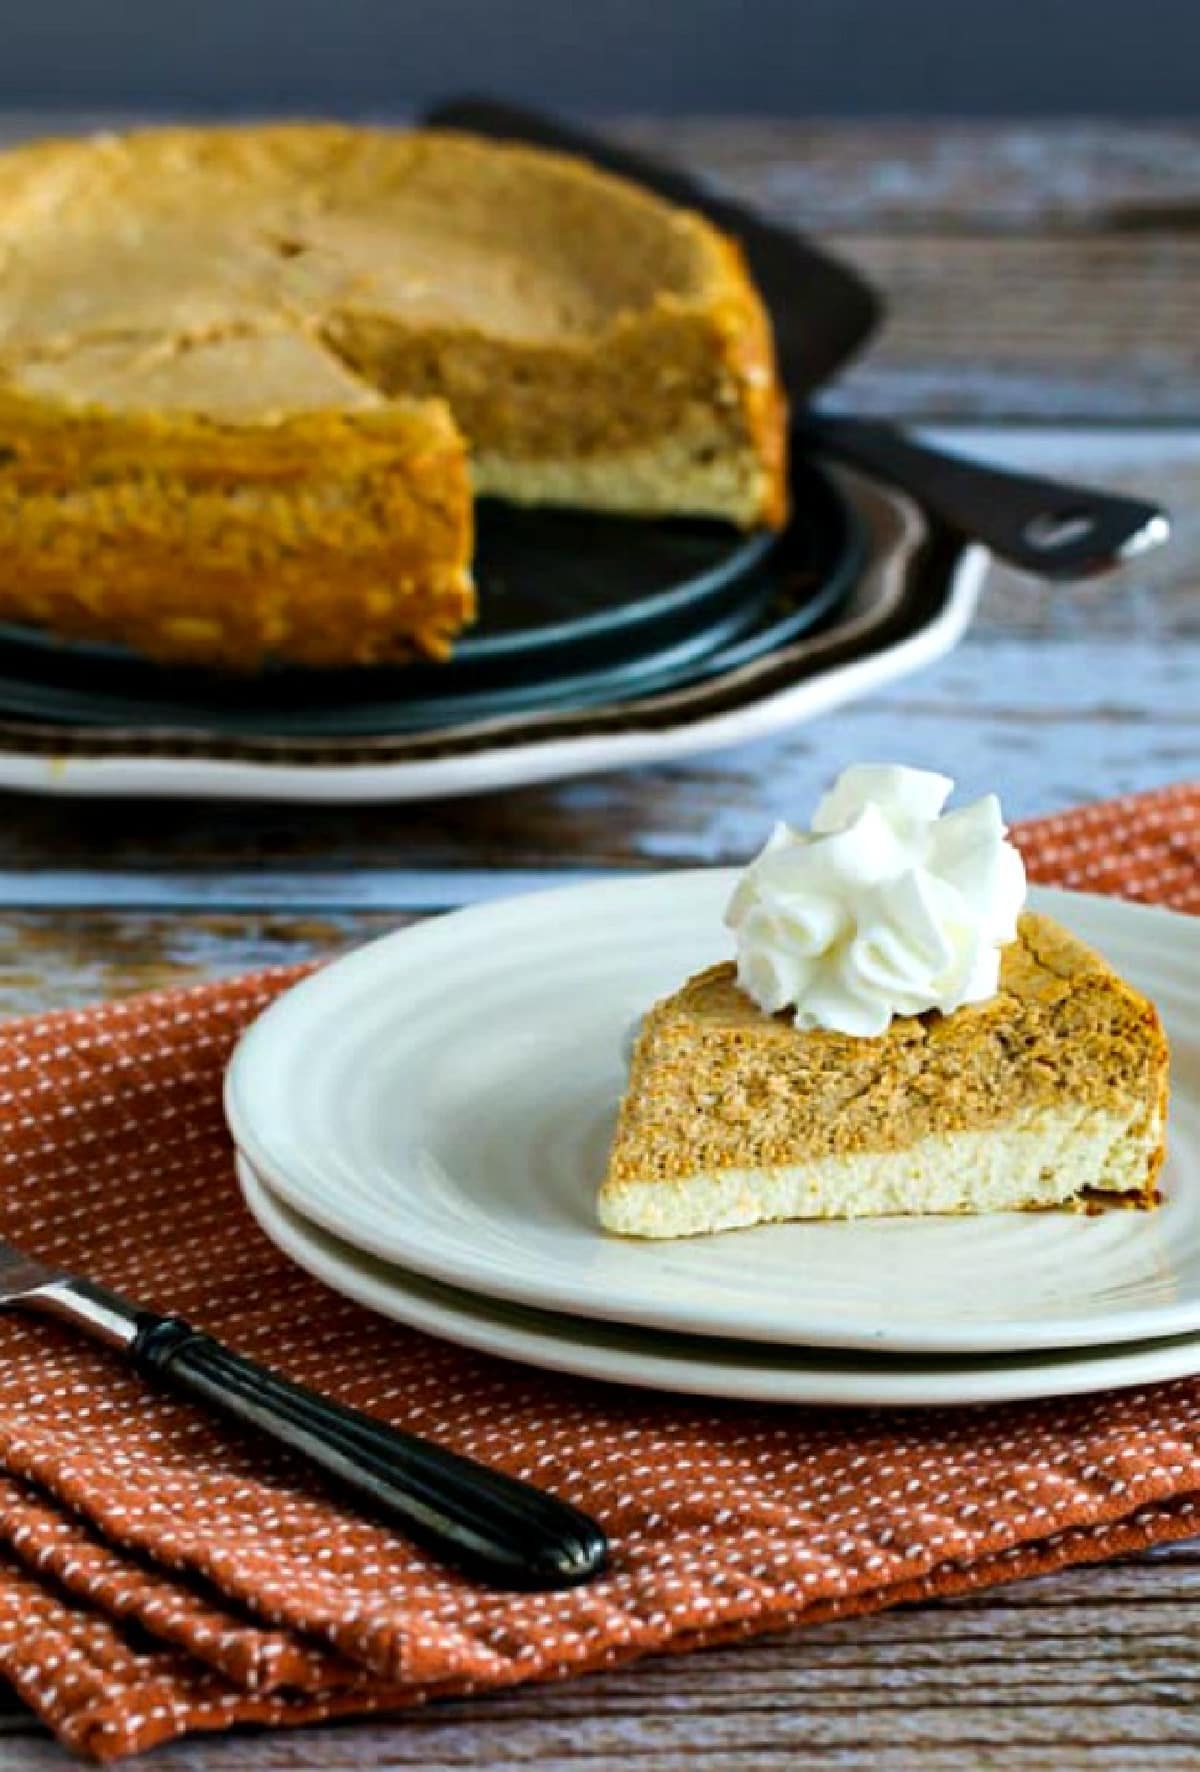 Sugar-Free Layered Pumpkin Cheesecake with one slice on small plate and cheesecake on plate in background